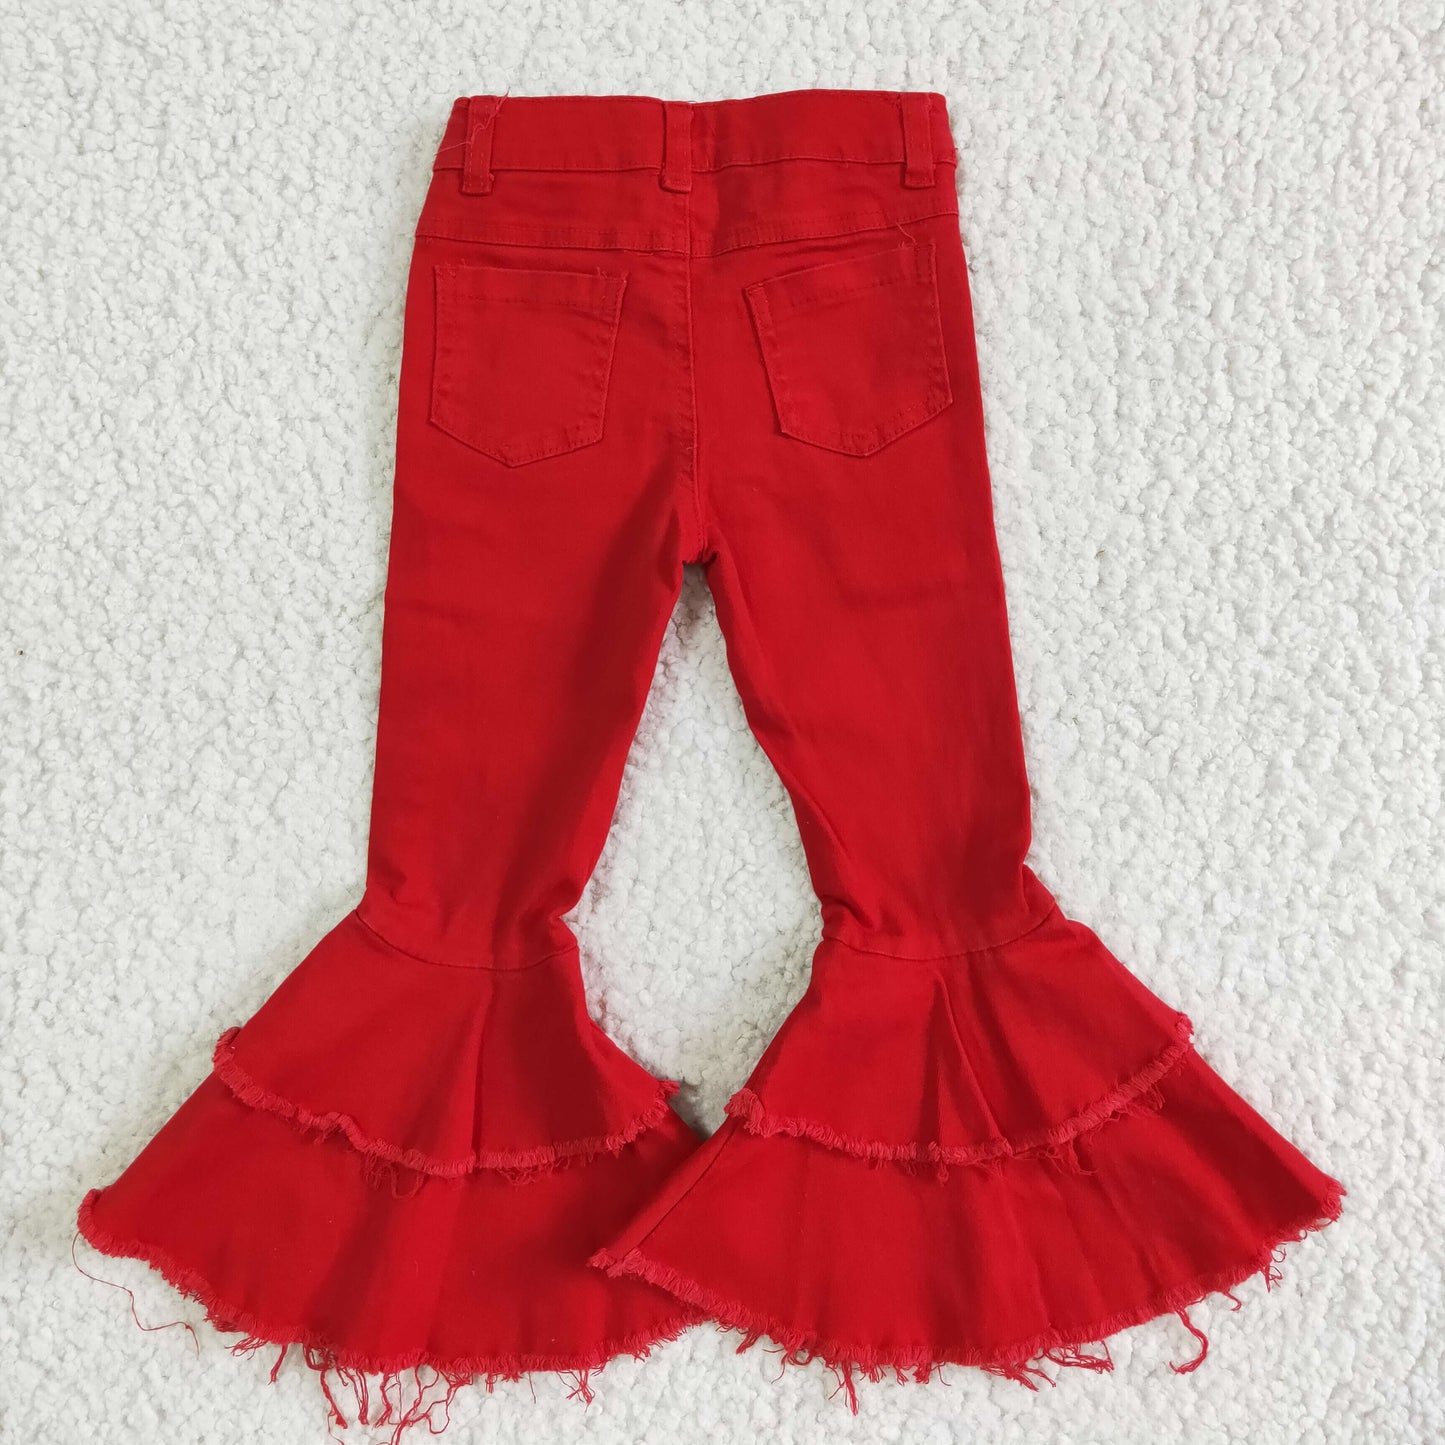 red double ruffle jeans denim pants